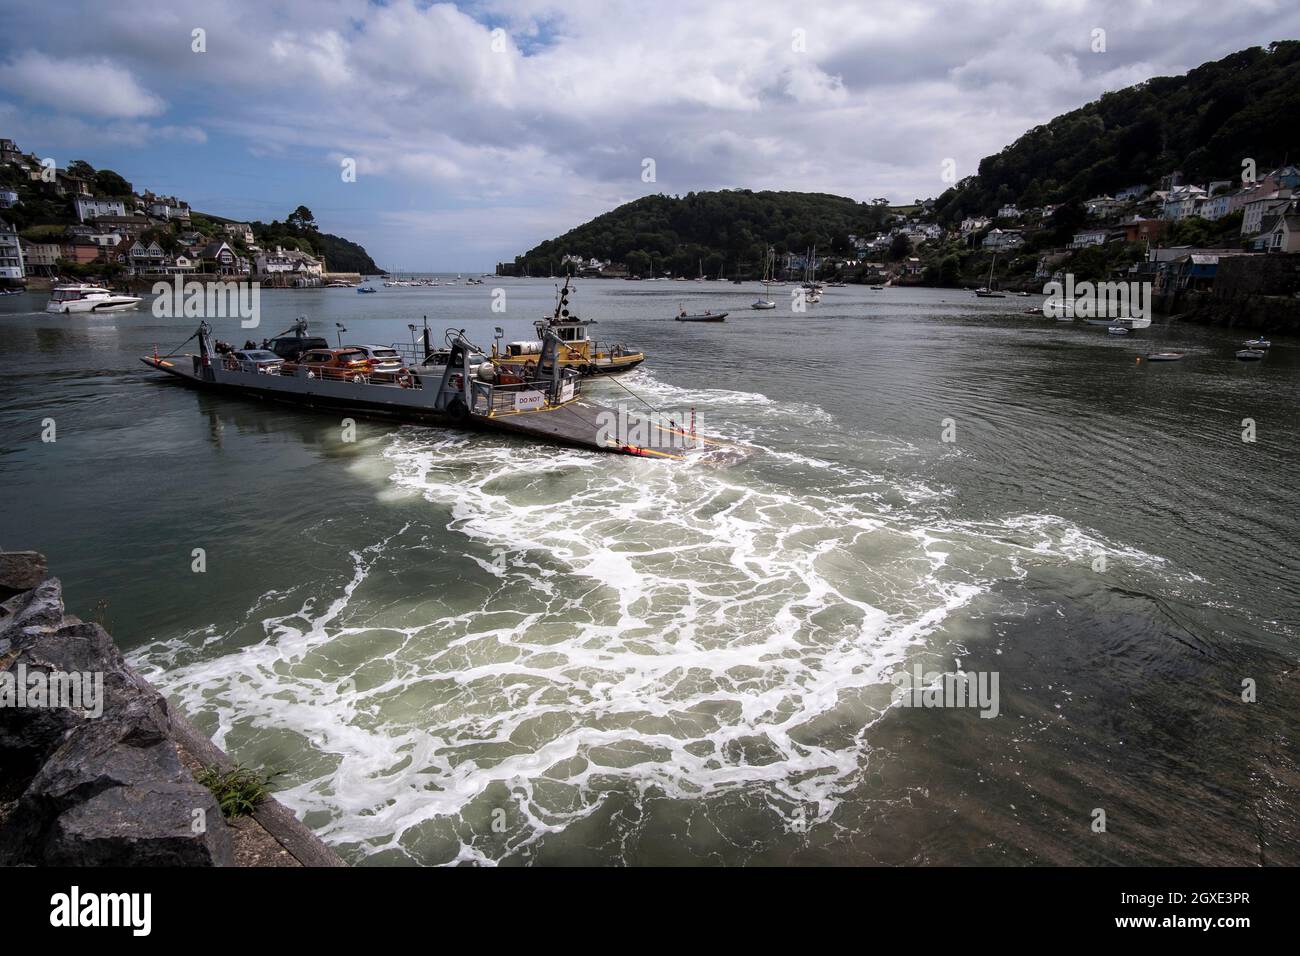 A view of the Dartmouth to Kingswear lower ferry as it leaves the berth in Dartmouth Stock Photo